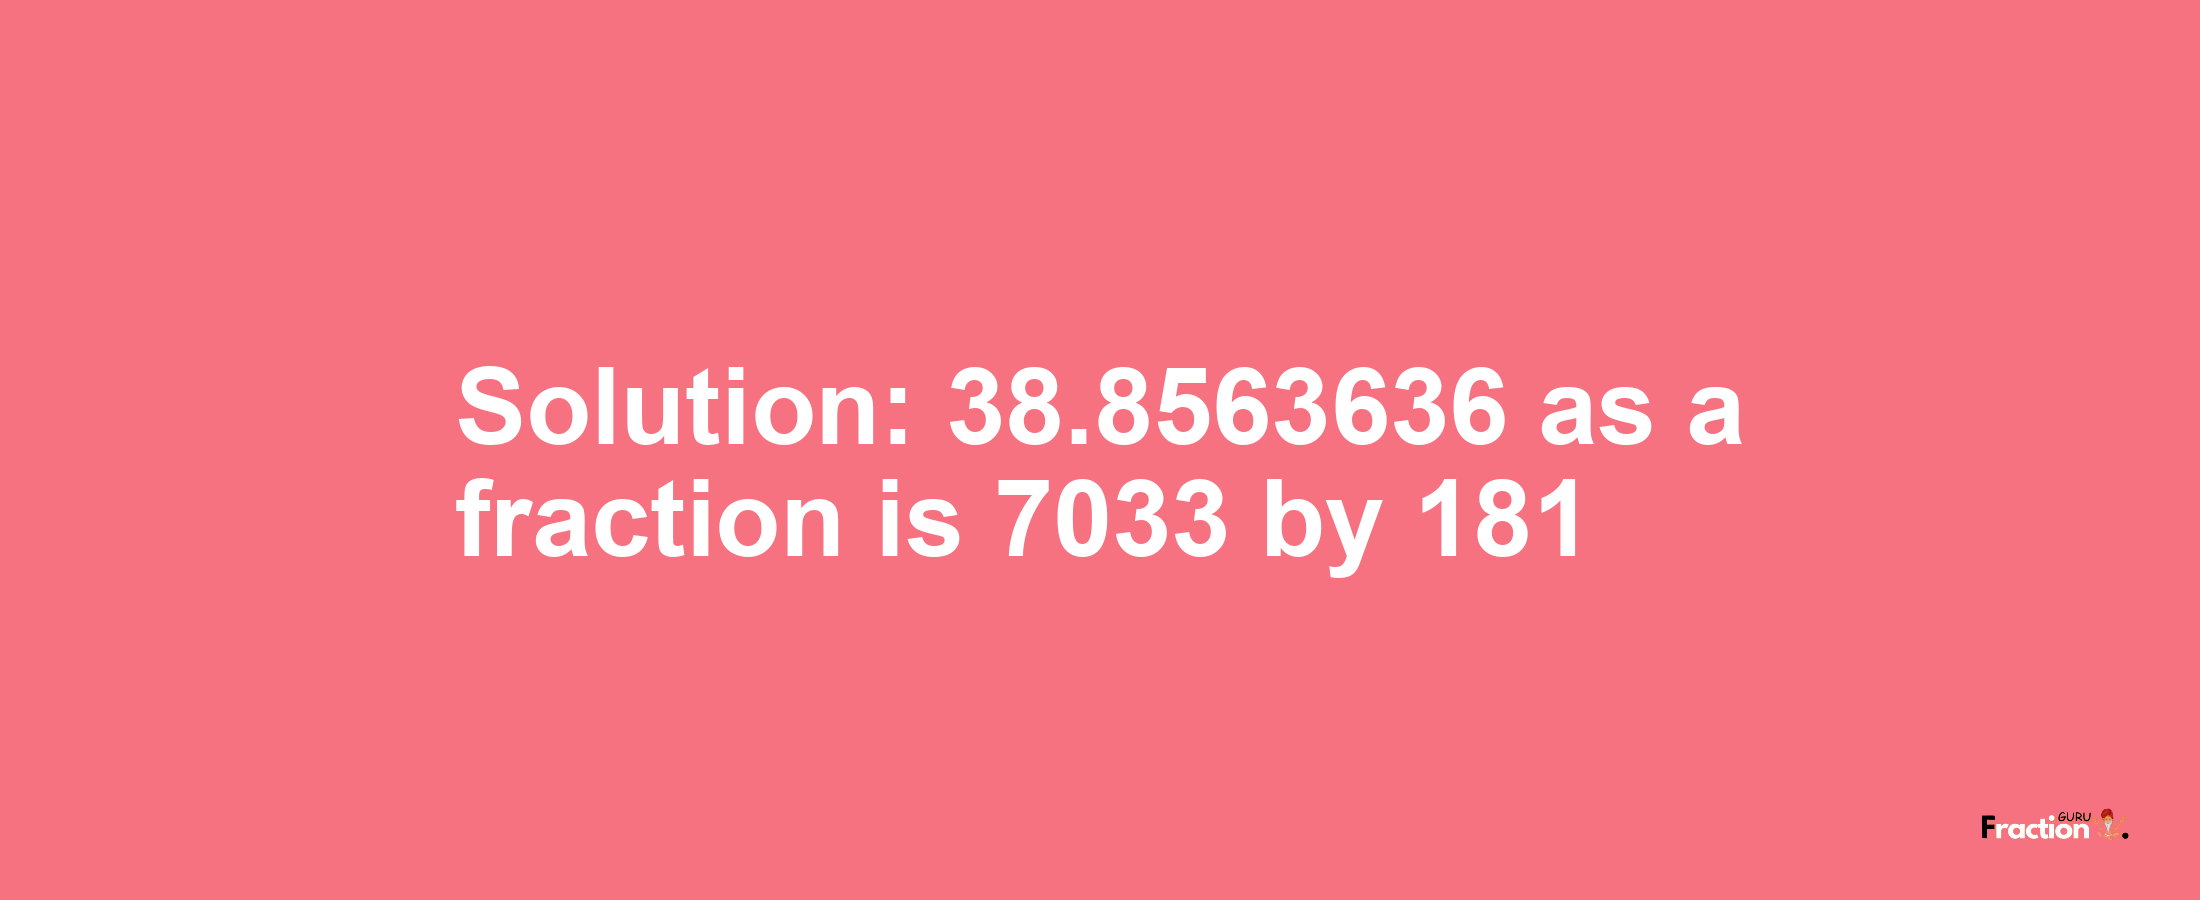 Solution:38.8563636 as a fraction is 7033/181